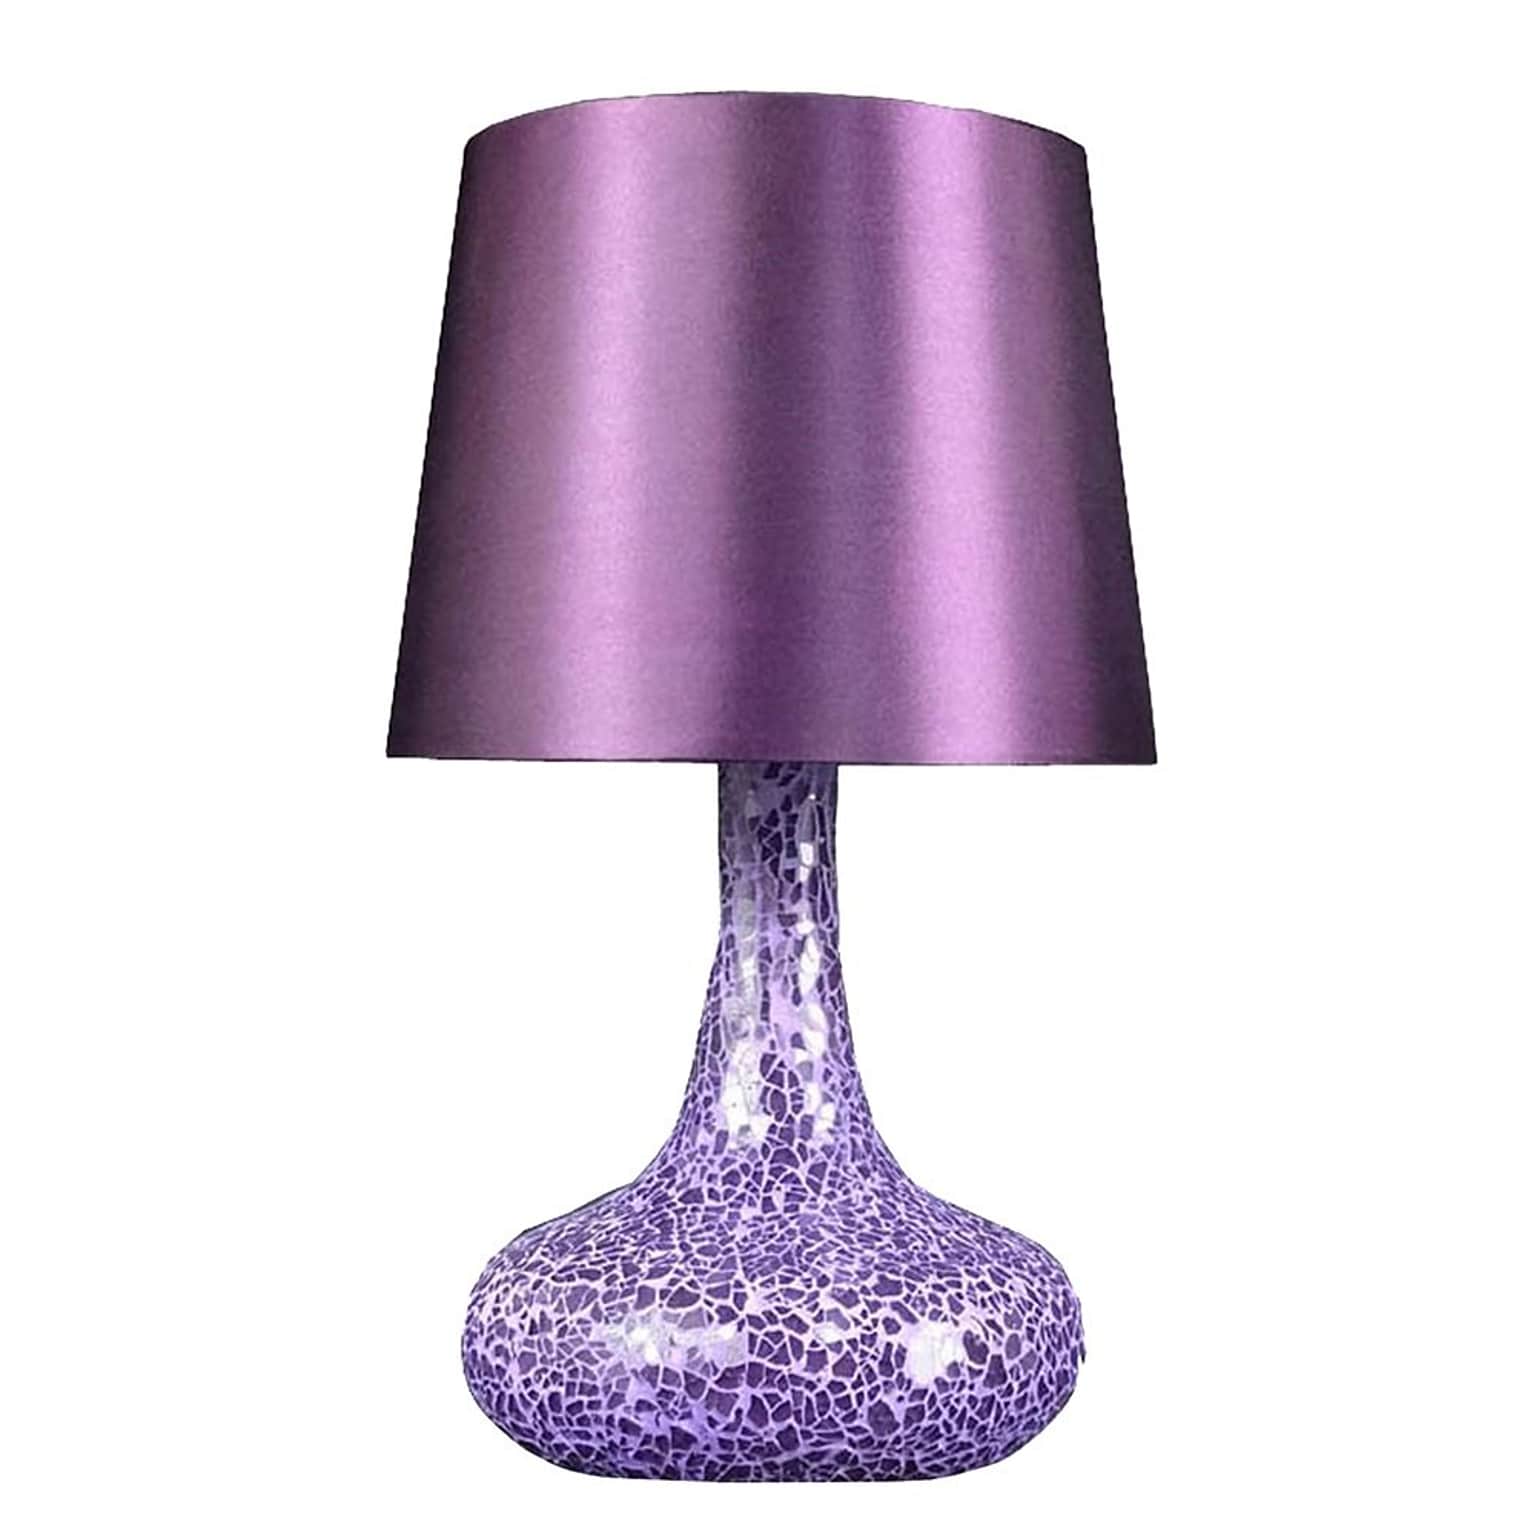 All the Rages Simple Designs LT3039-PRP Mosaic Genie Table Lamp, Purple